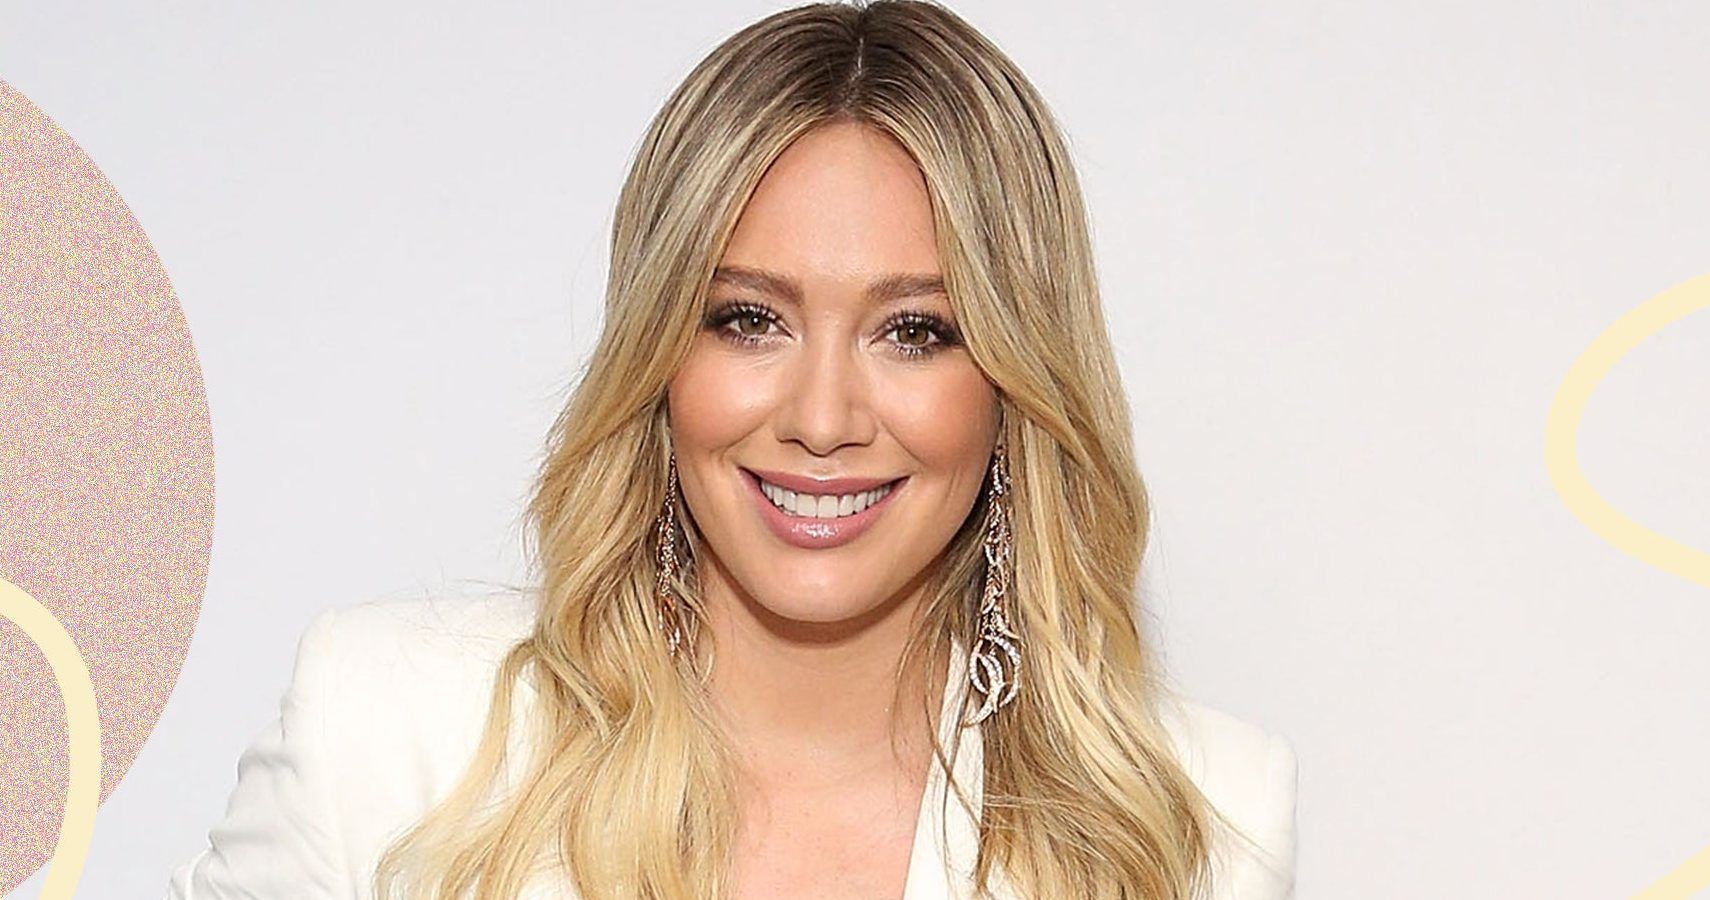 Hilary Duff is best known for her role on Disneys Lizzie McGuire